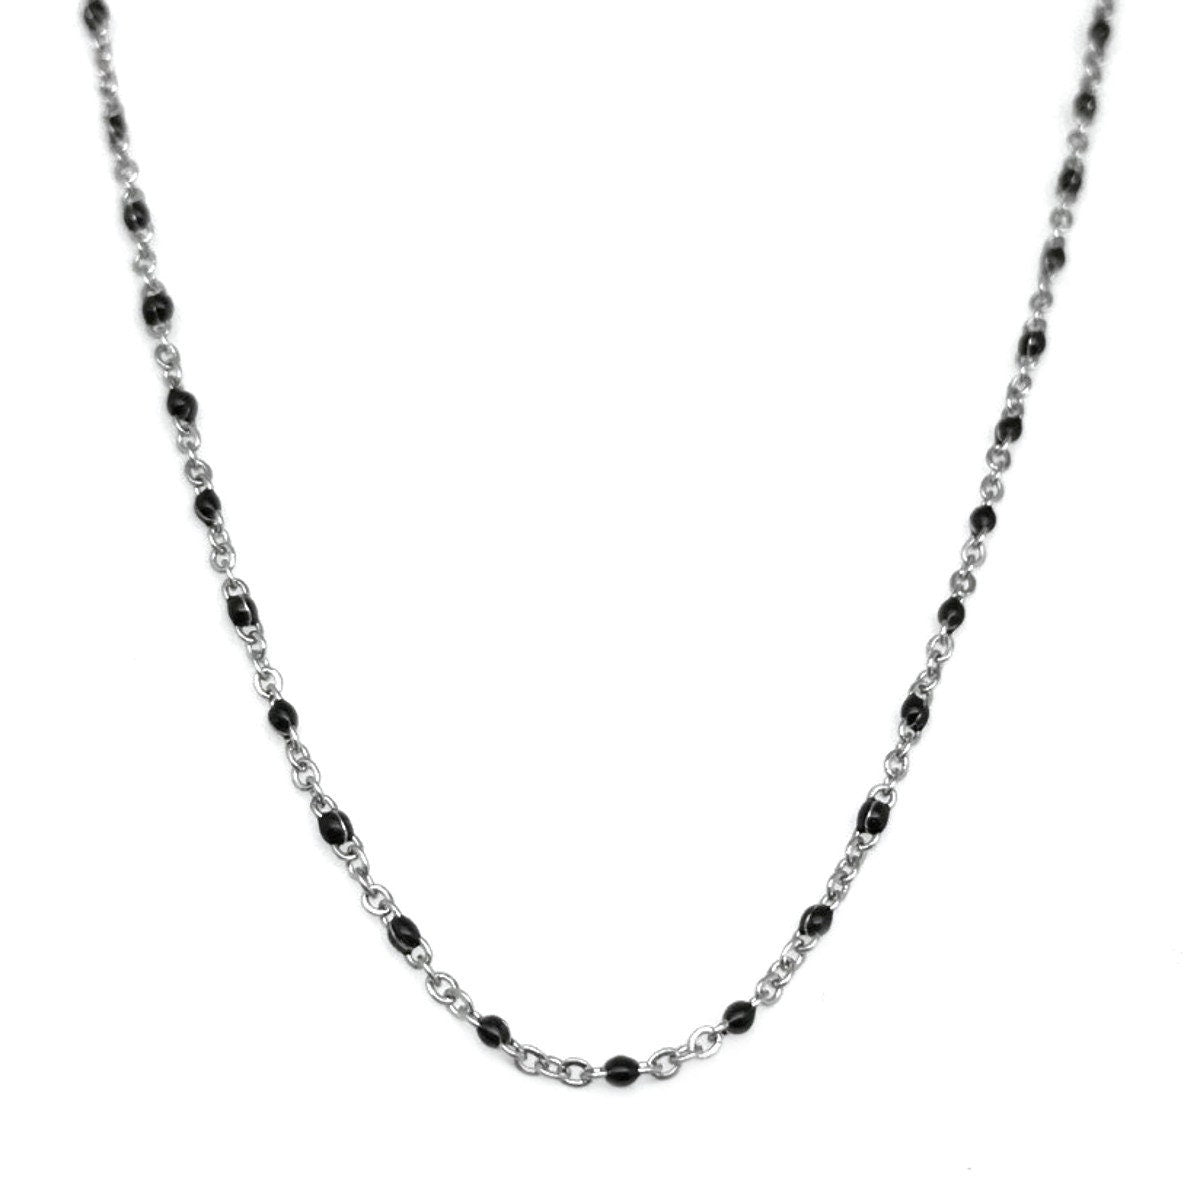 Thin Steel and Black Resin Bead Necklace Chain (1.5mm), 16